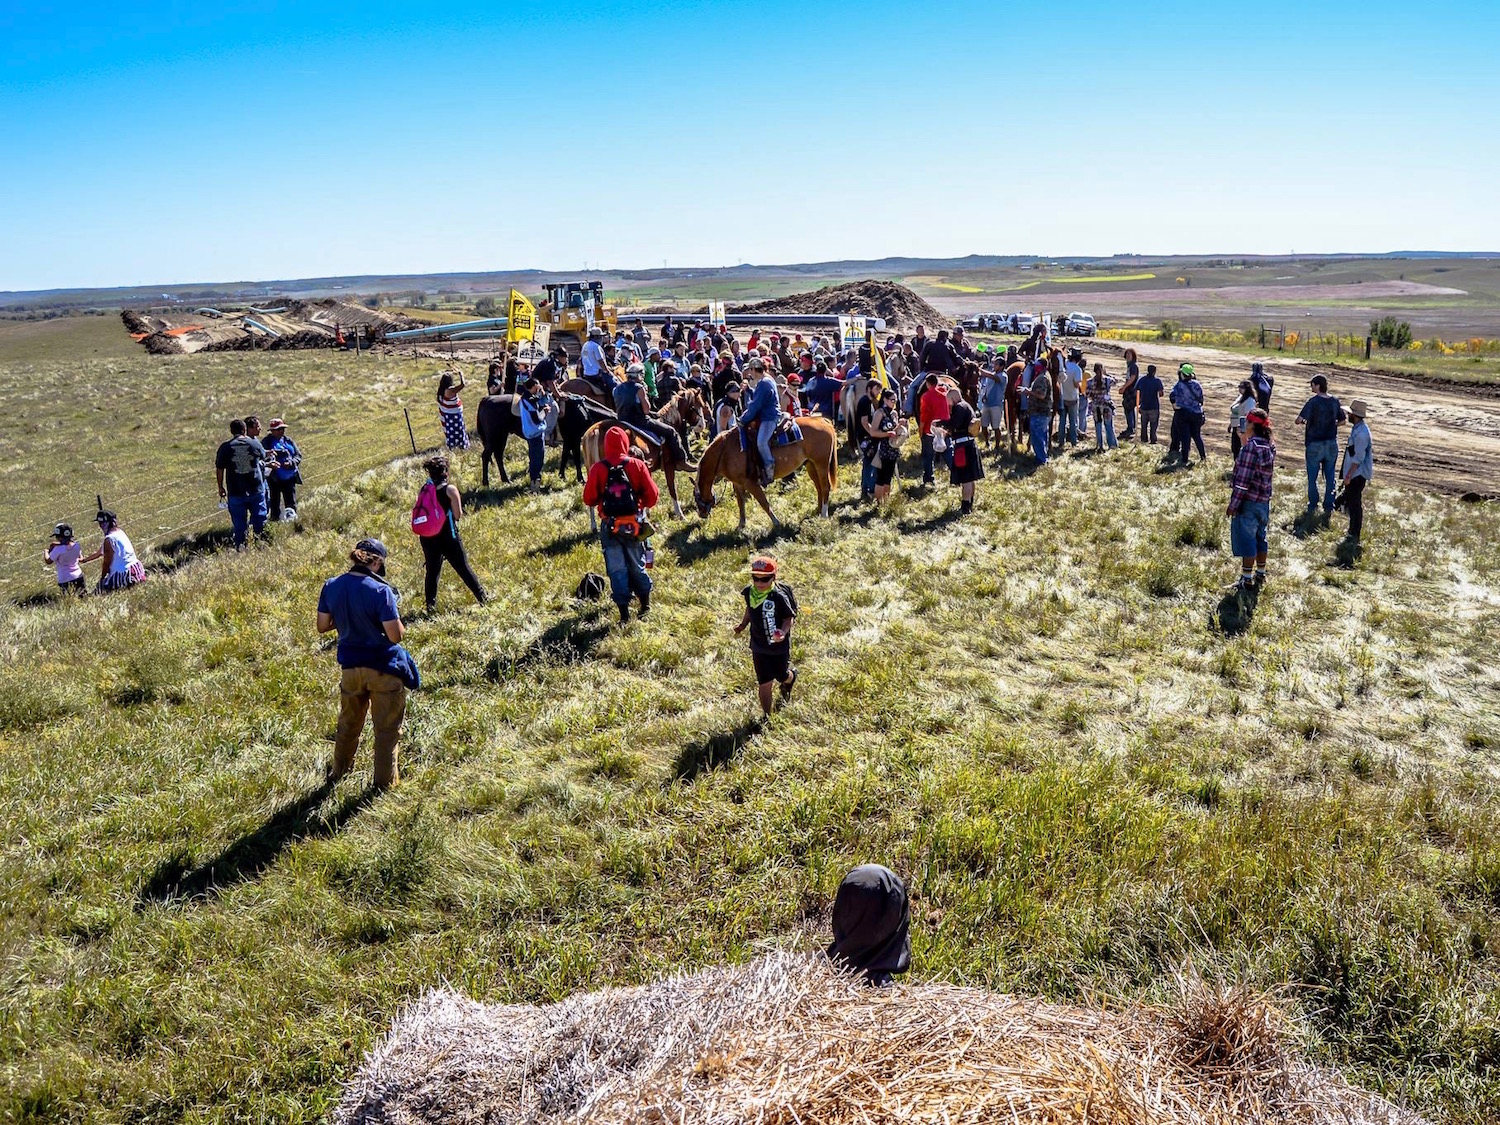 Mary Annette Pember: Water protectors rounded up for praying